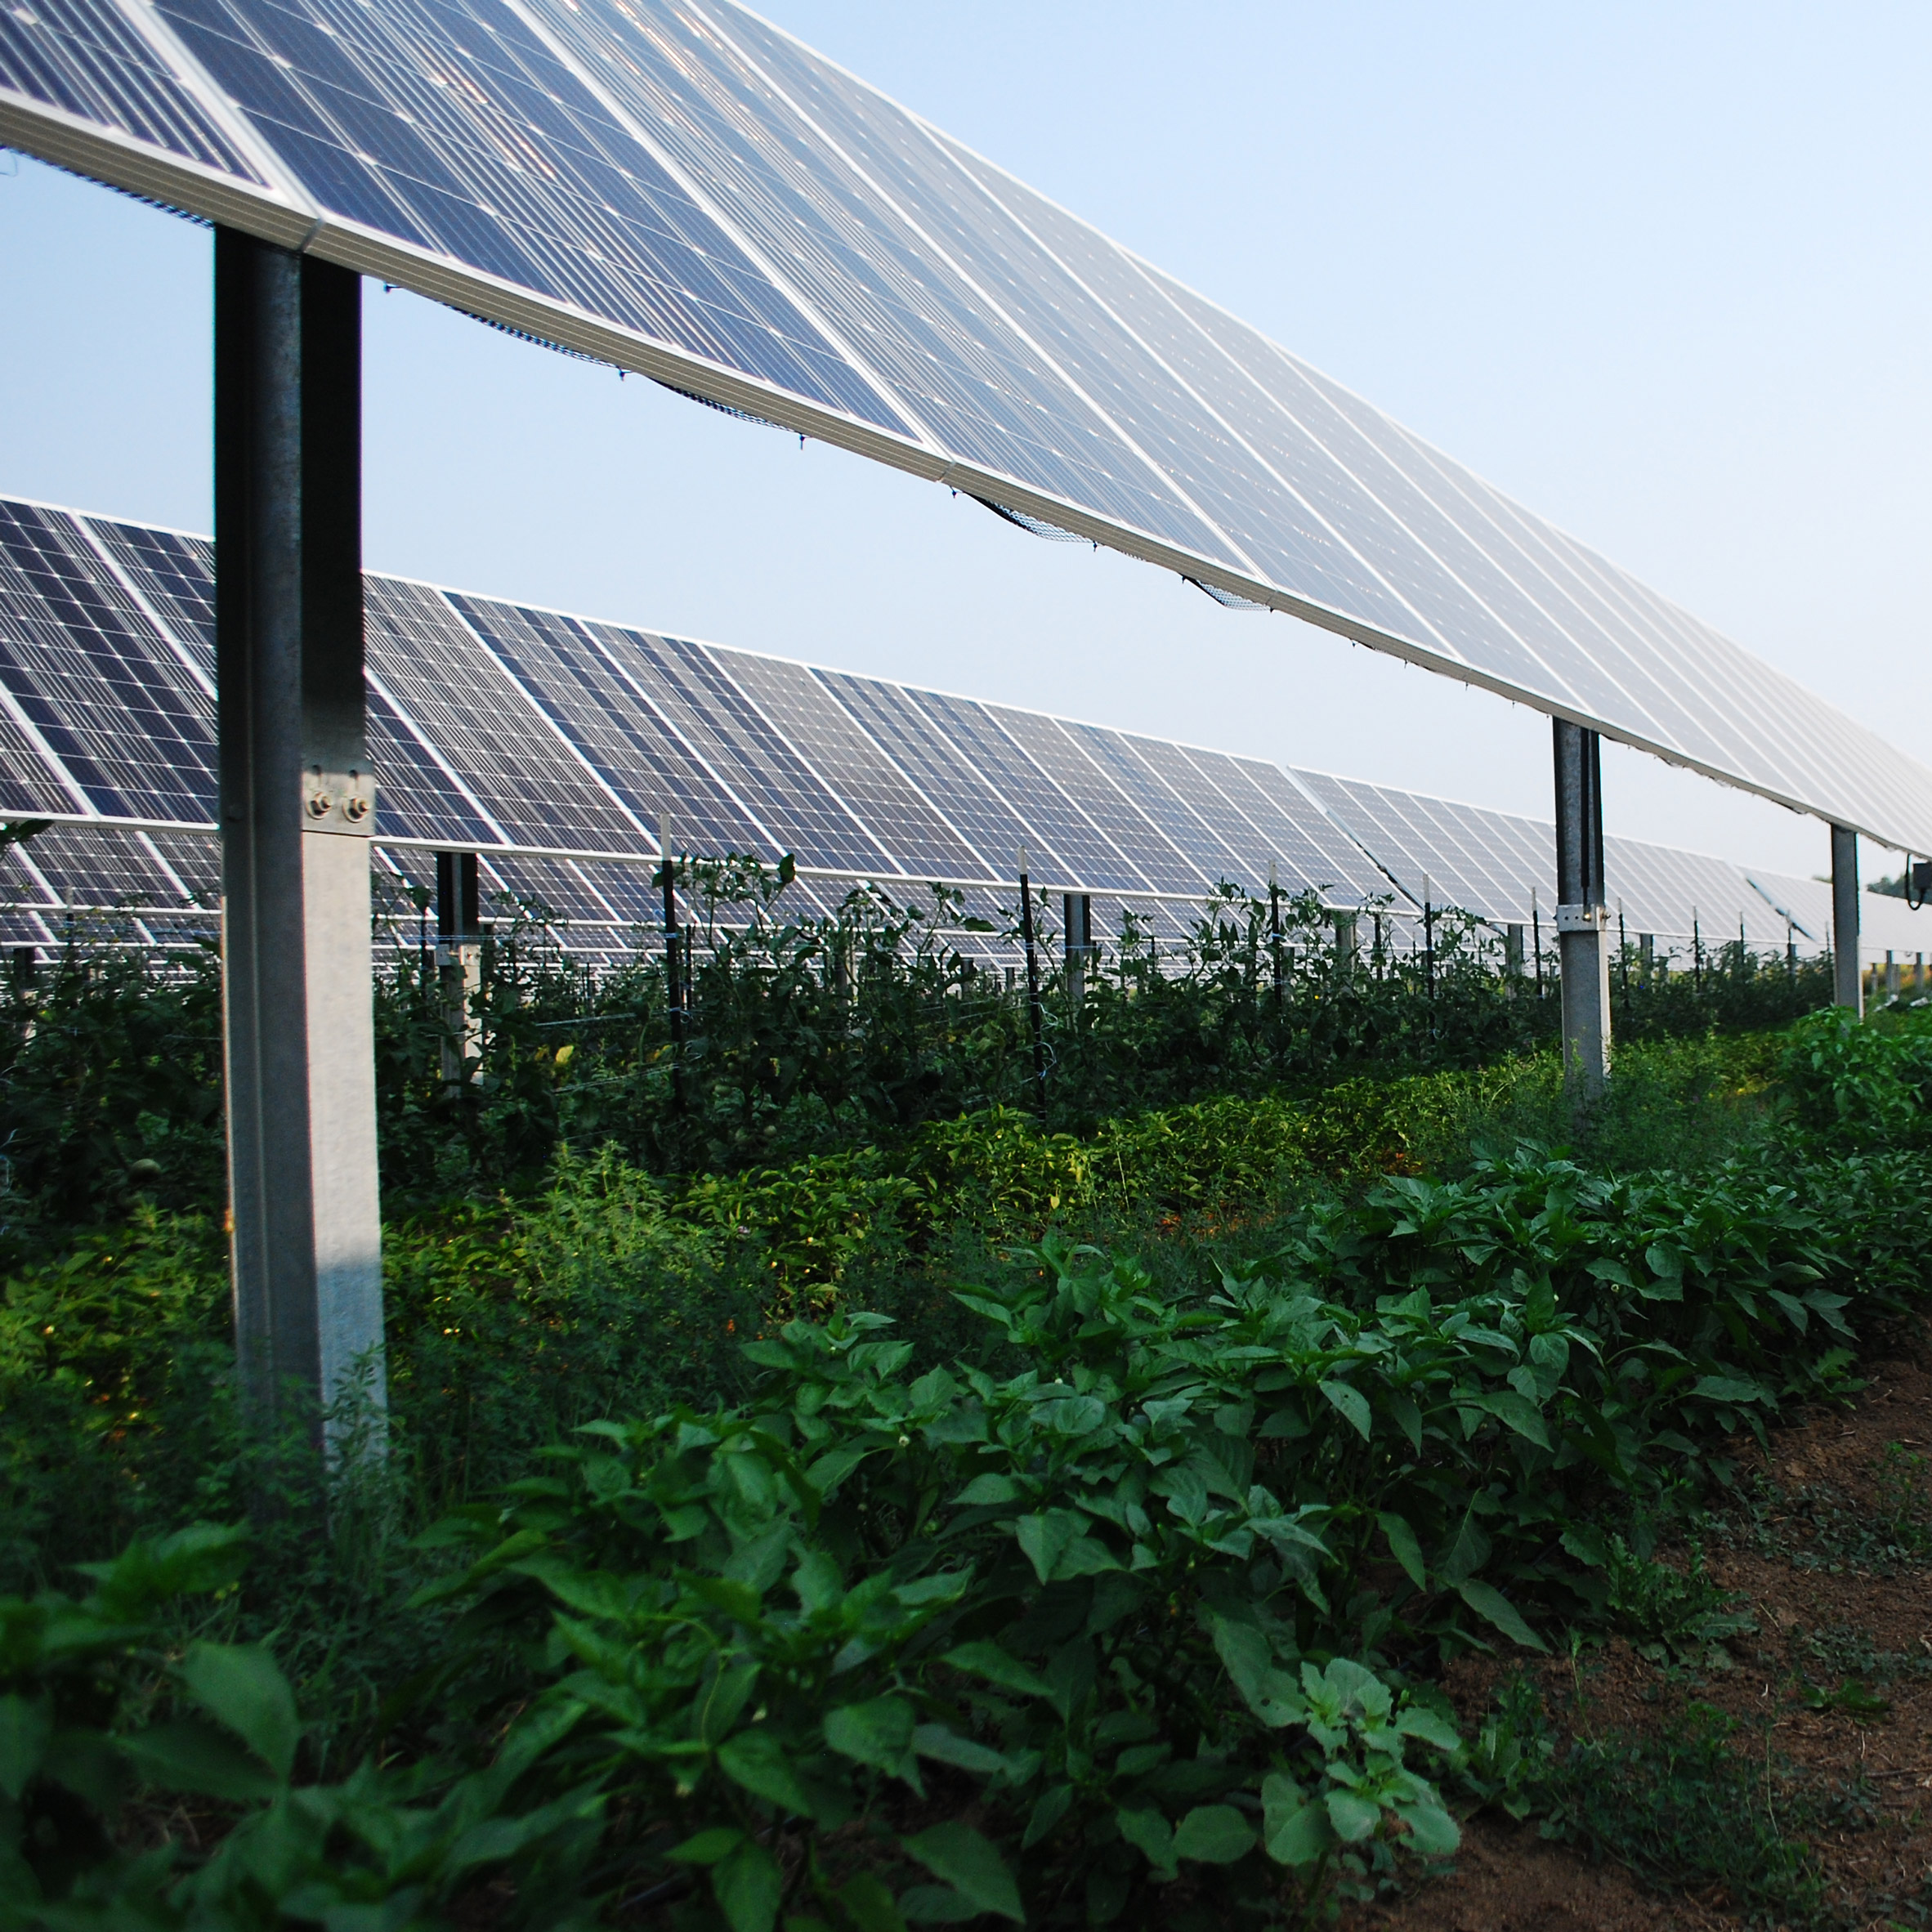 Agrivoltaic solar farms offer shocking benefits beyond producing